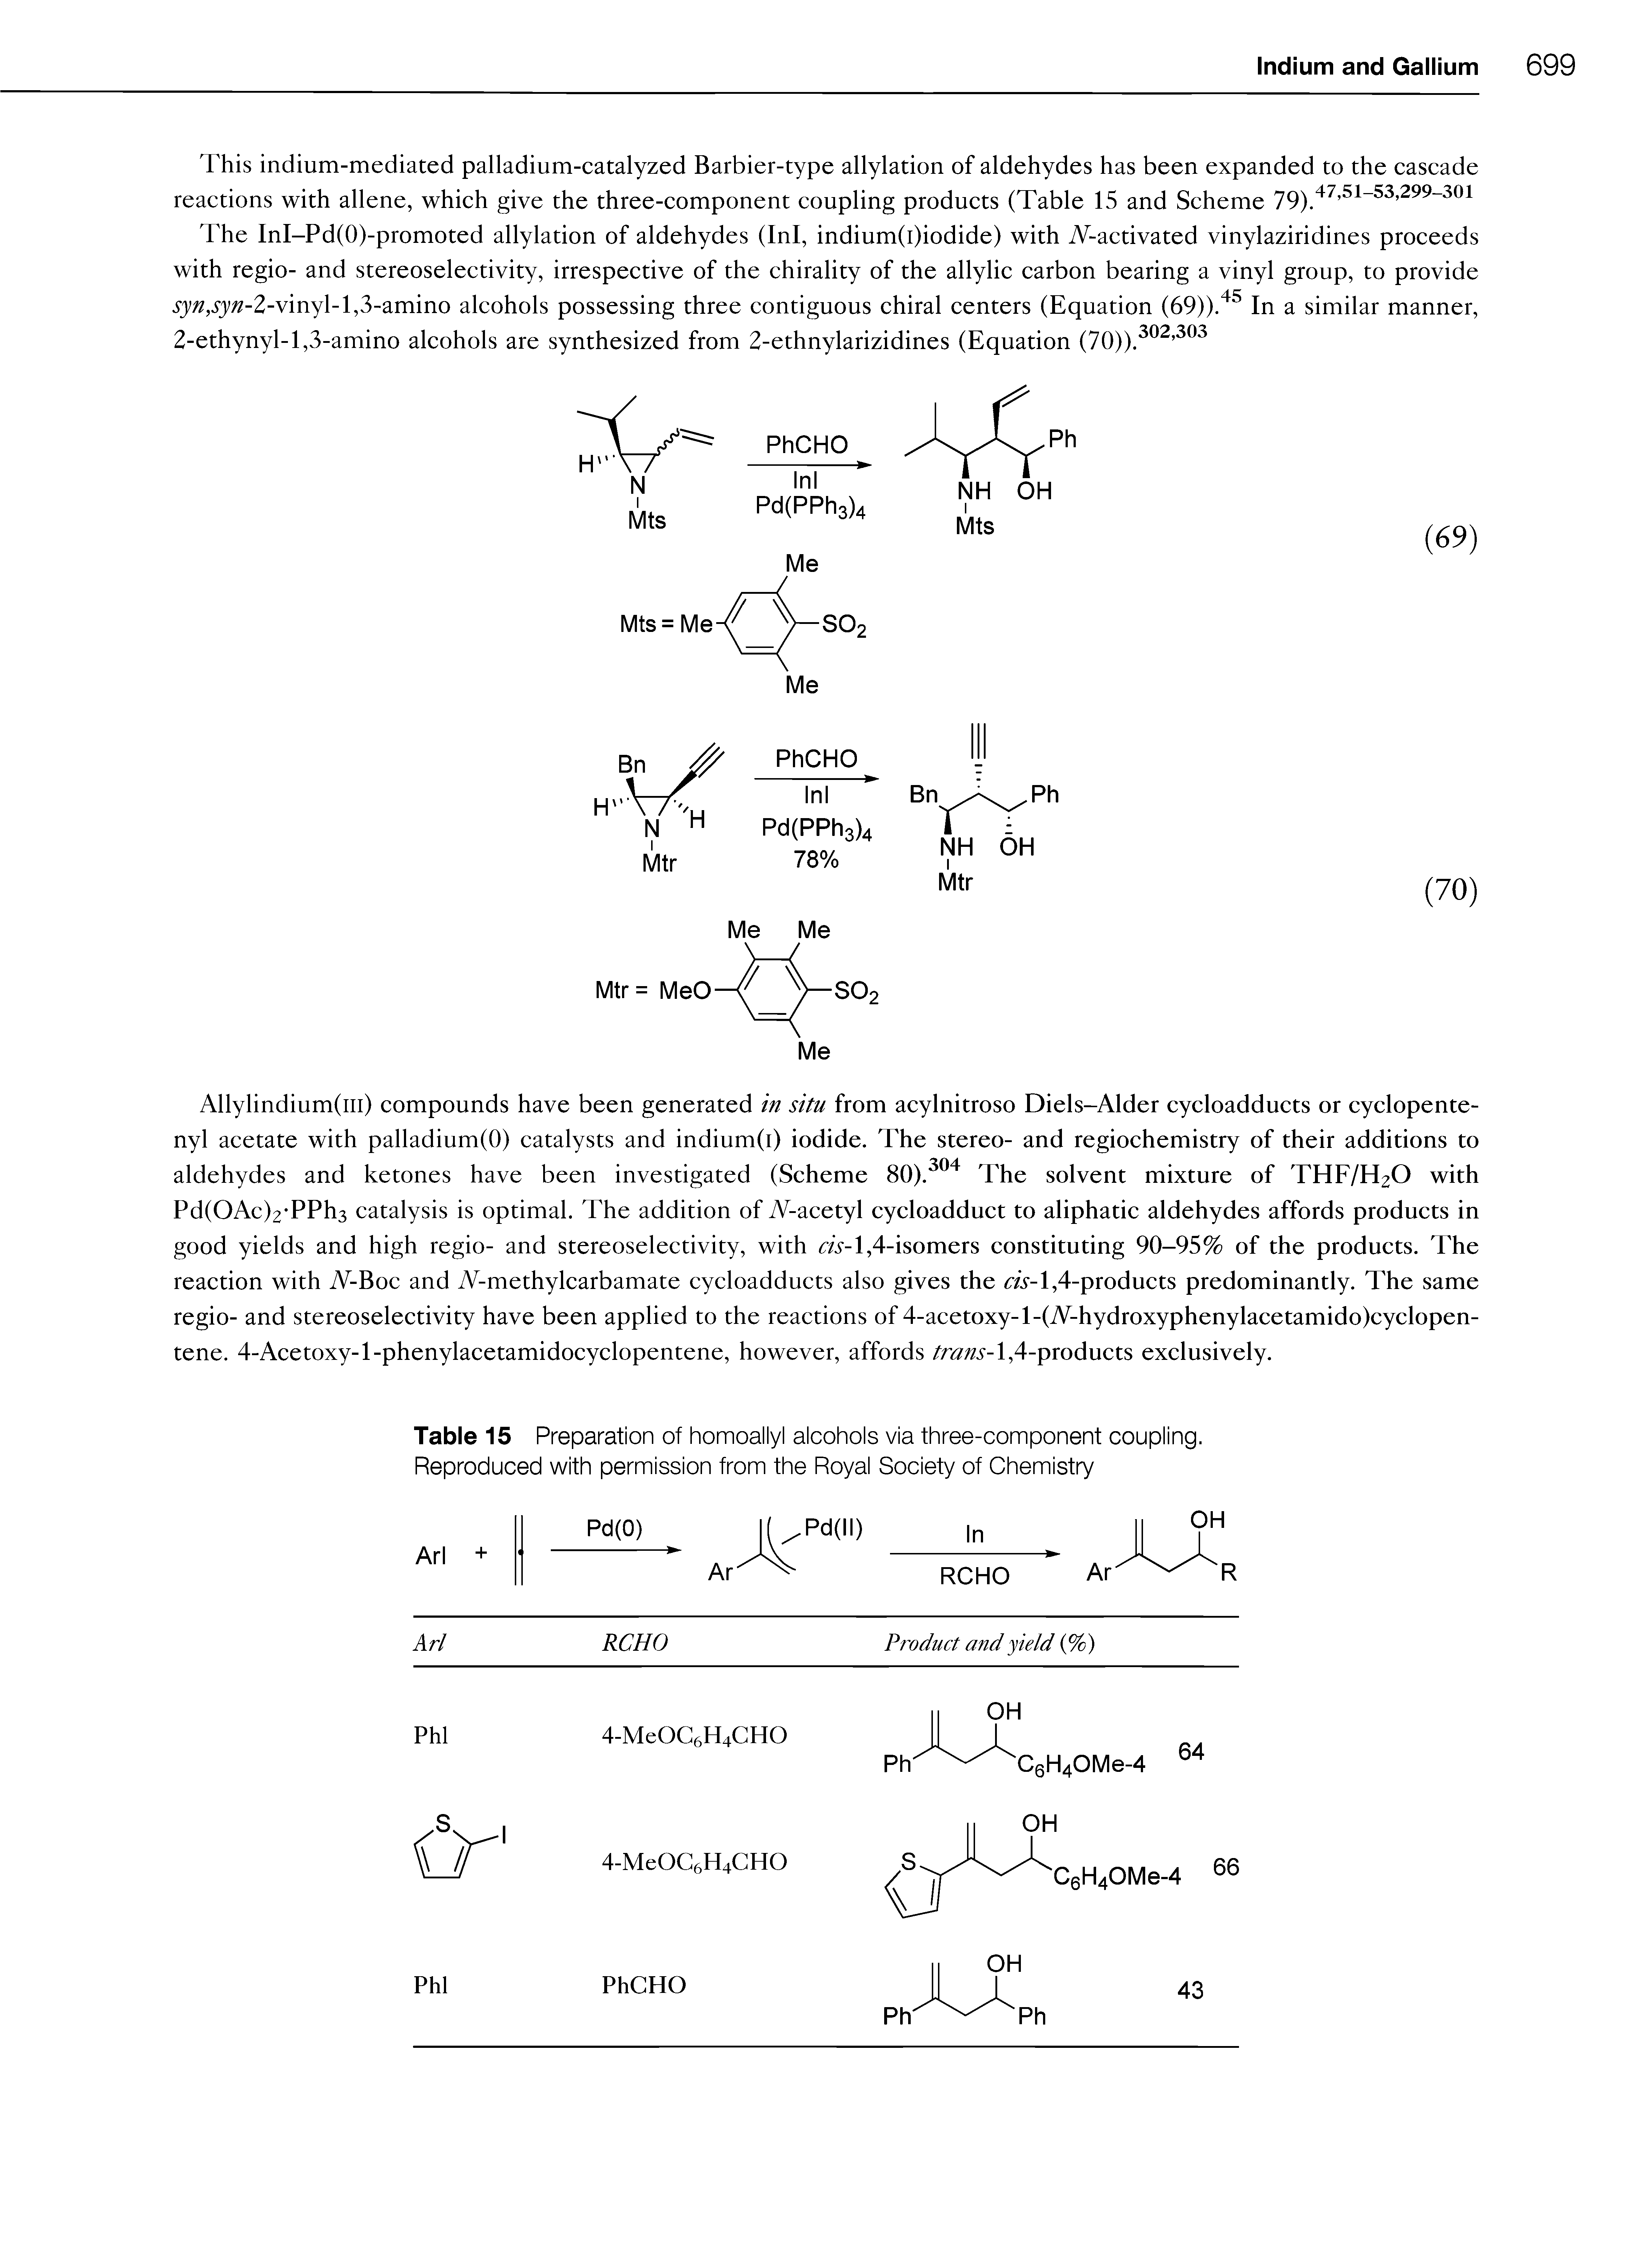 Table 15 Preparation of homoallyl alcohols via three-component coupling. Reproduced with permission from the Royal Society of Chemistry...